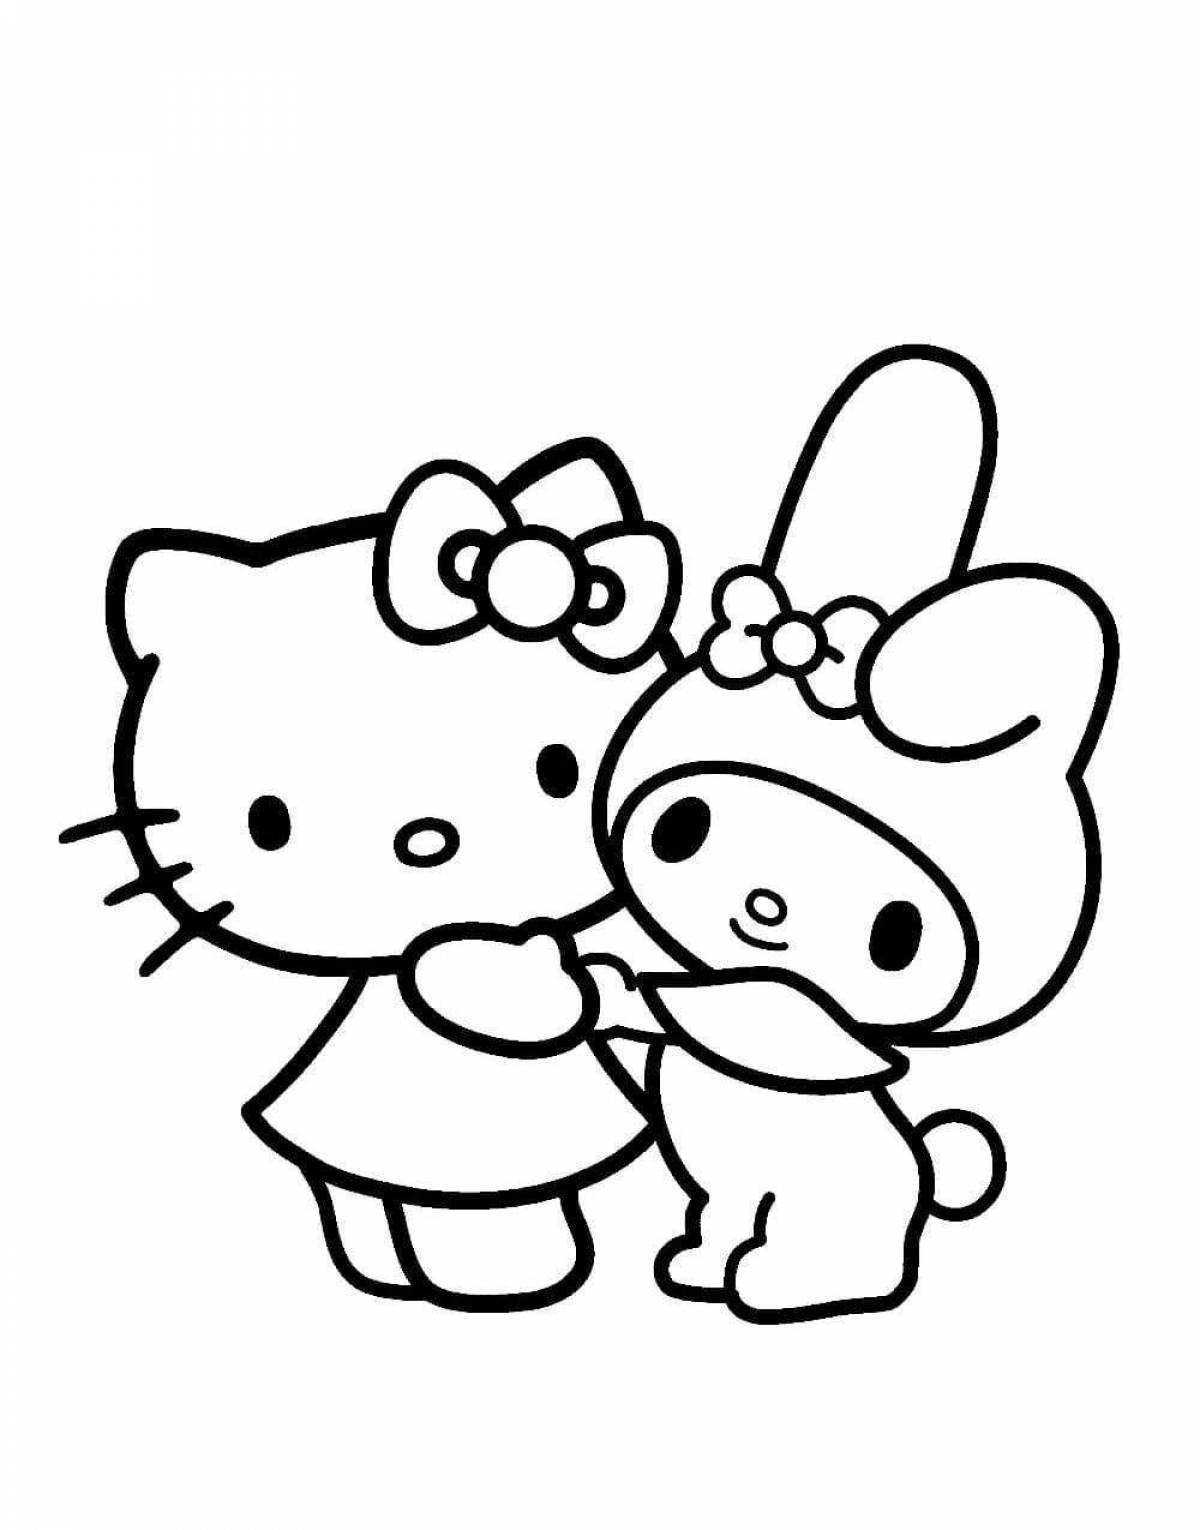 Unique hello kitty kuromi coloring book for girls